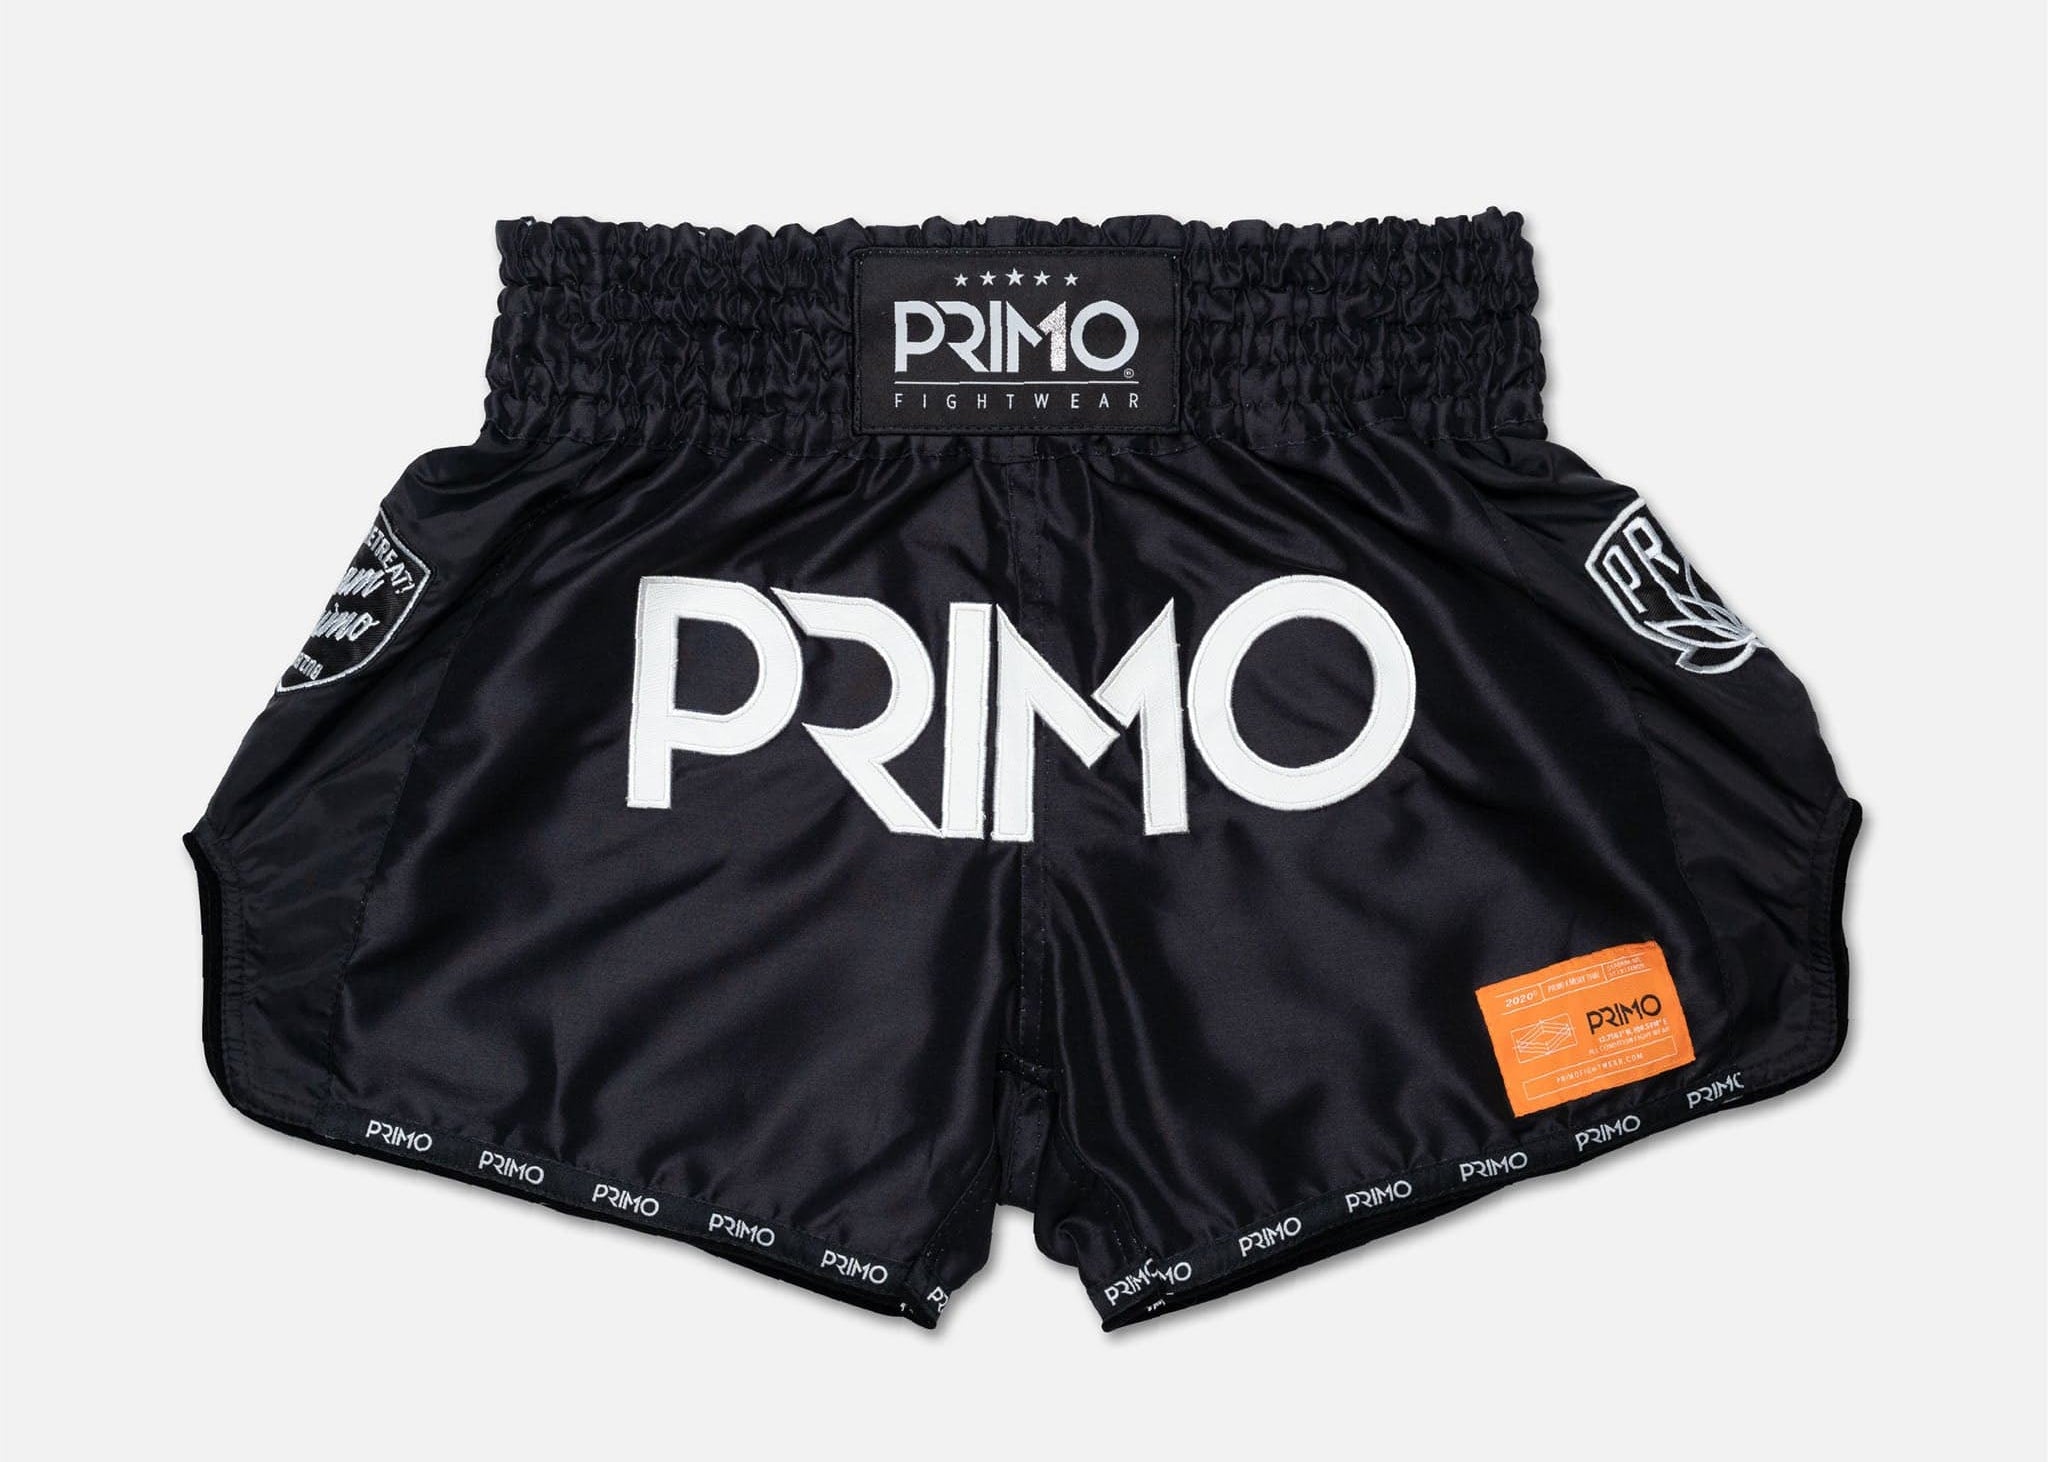 Primo Fight Wear Official Muay Thai Shorts - Free Flow Series - Gotham's Finest